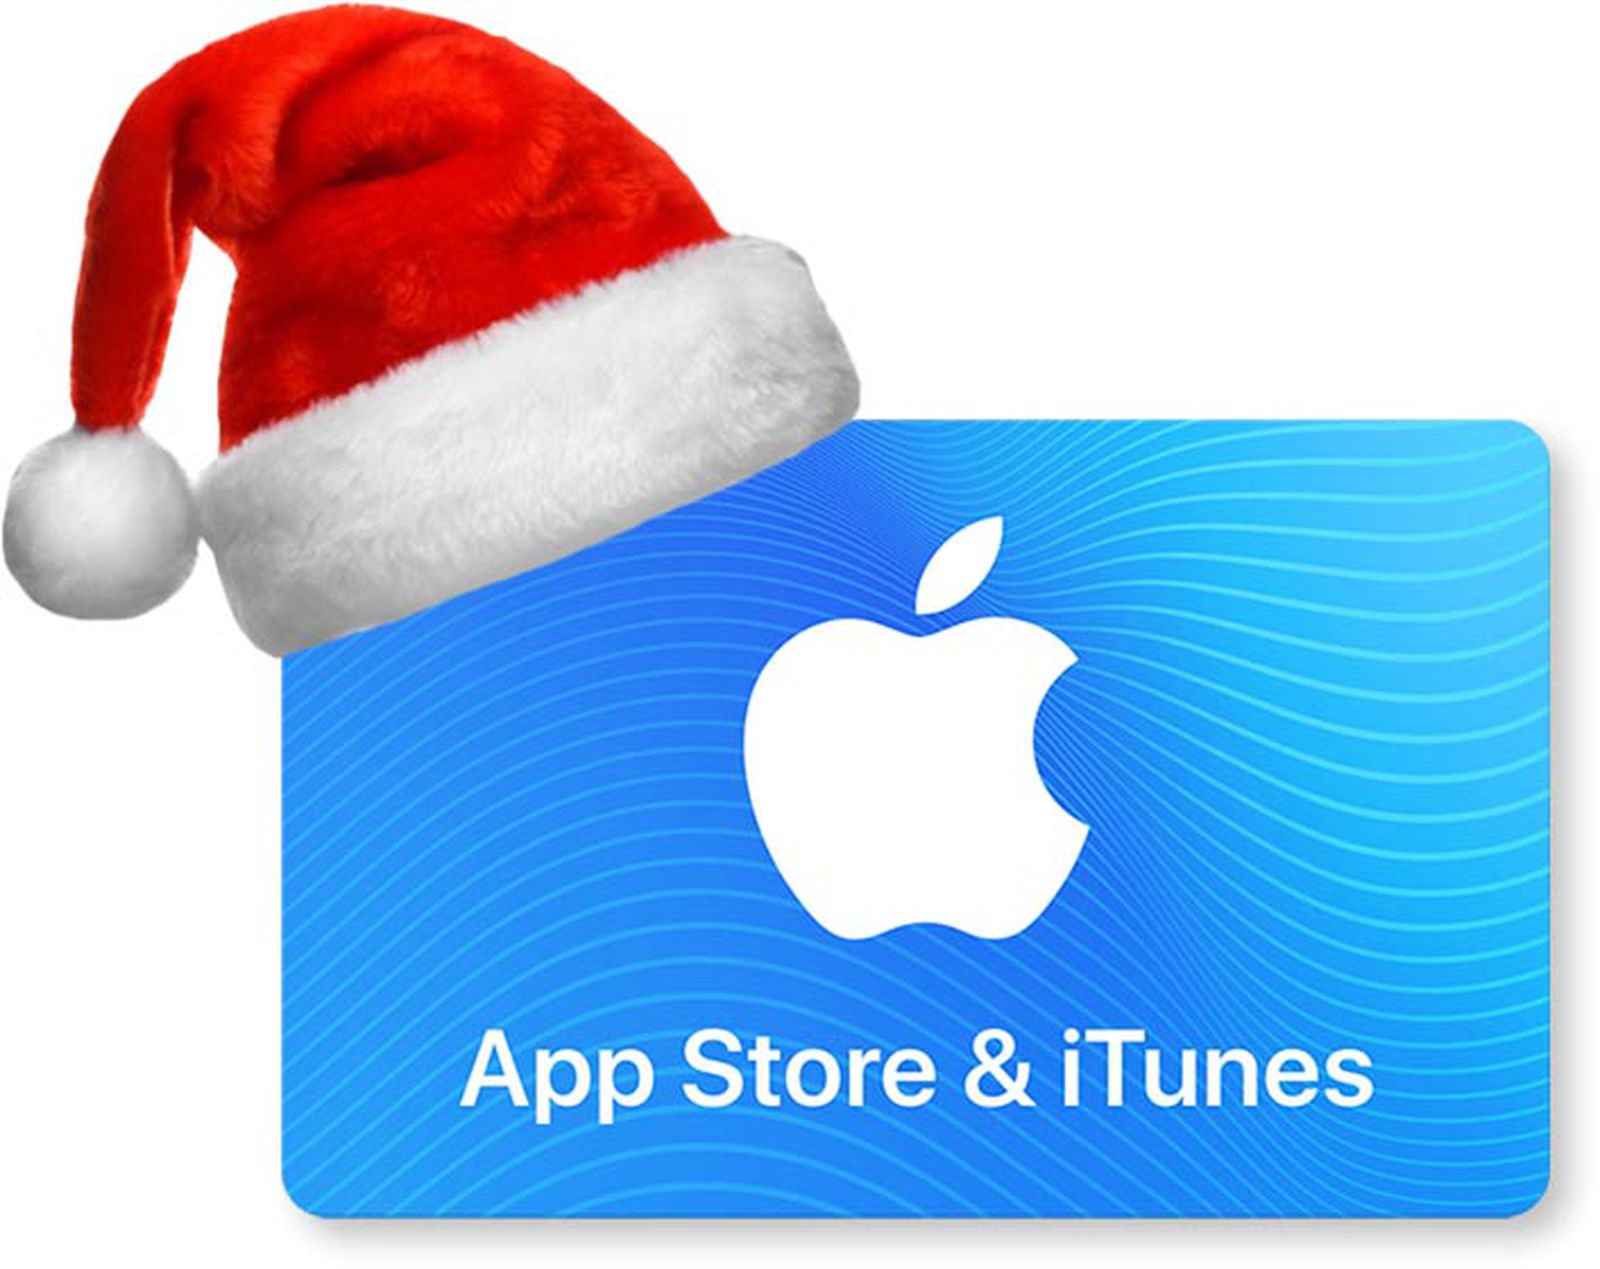 Itunes credit store app use in App Store